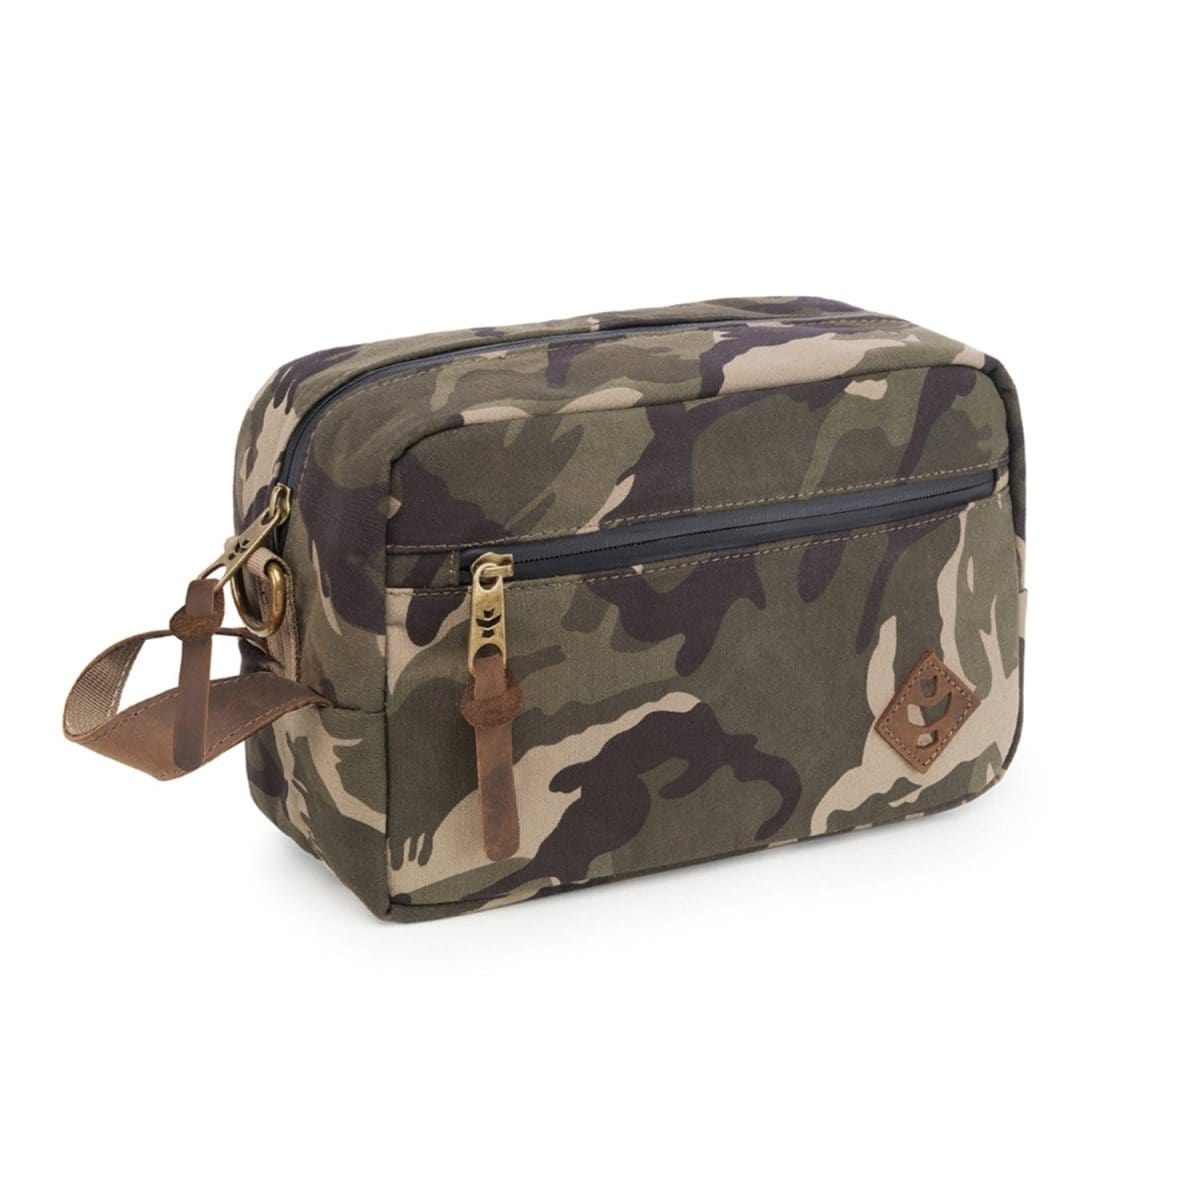 Revelry Supply Travel Bag Camo Brown The Stowaway - Smell Proof Toiletry Kit